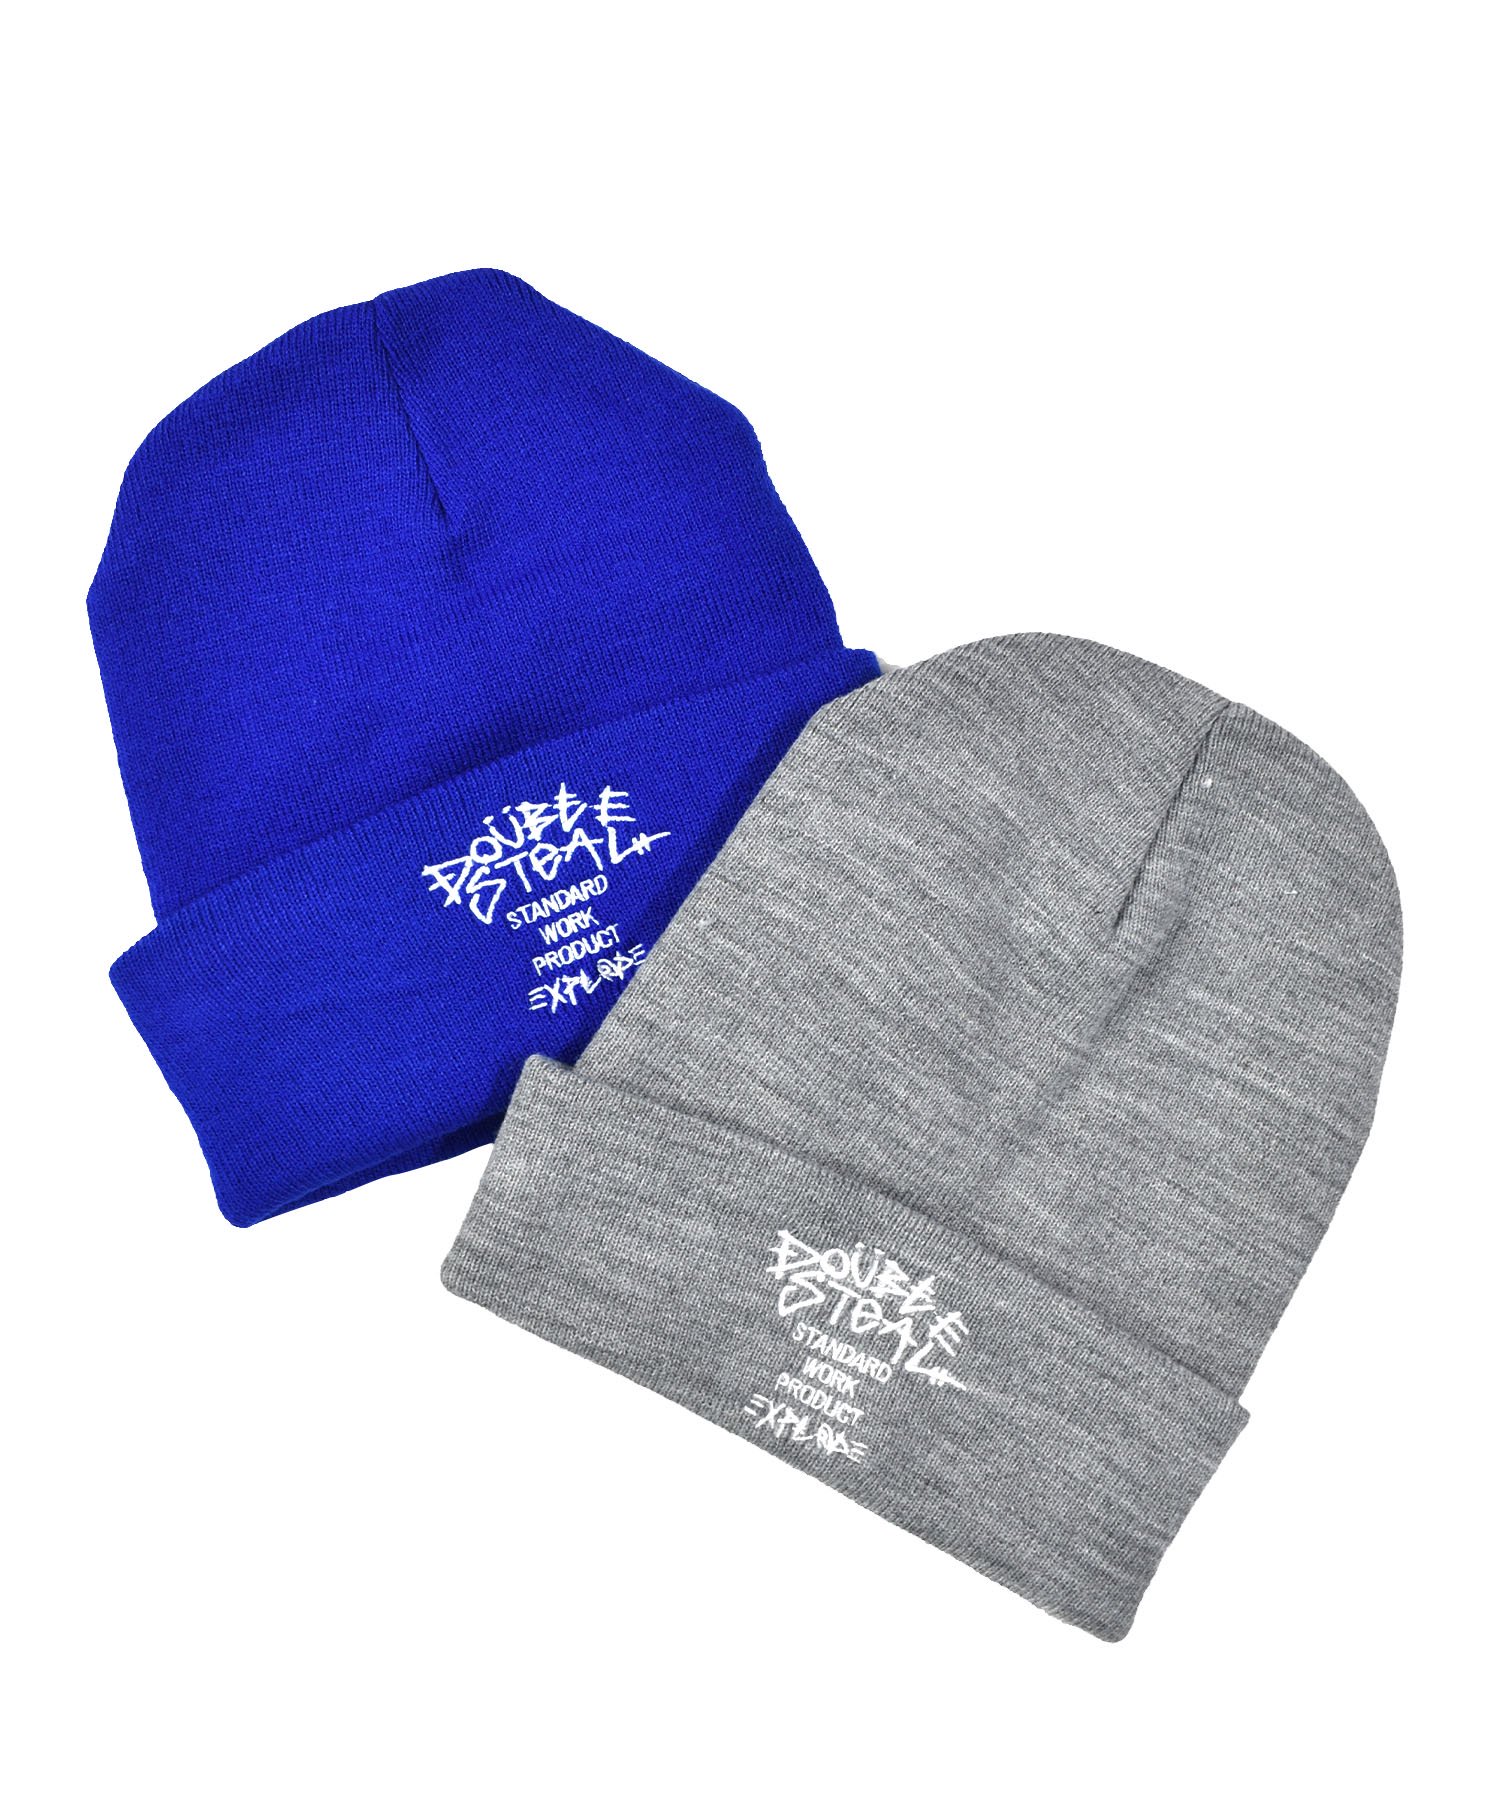 Tagging Knit cap